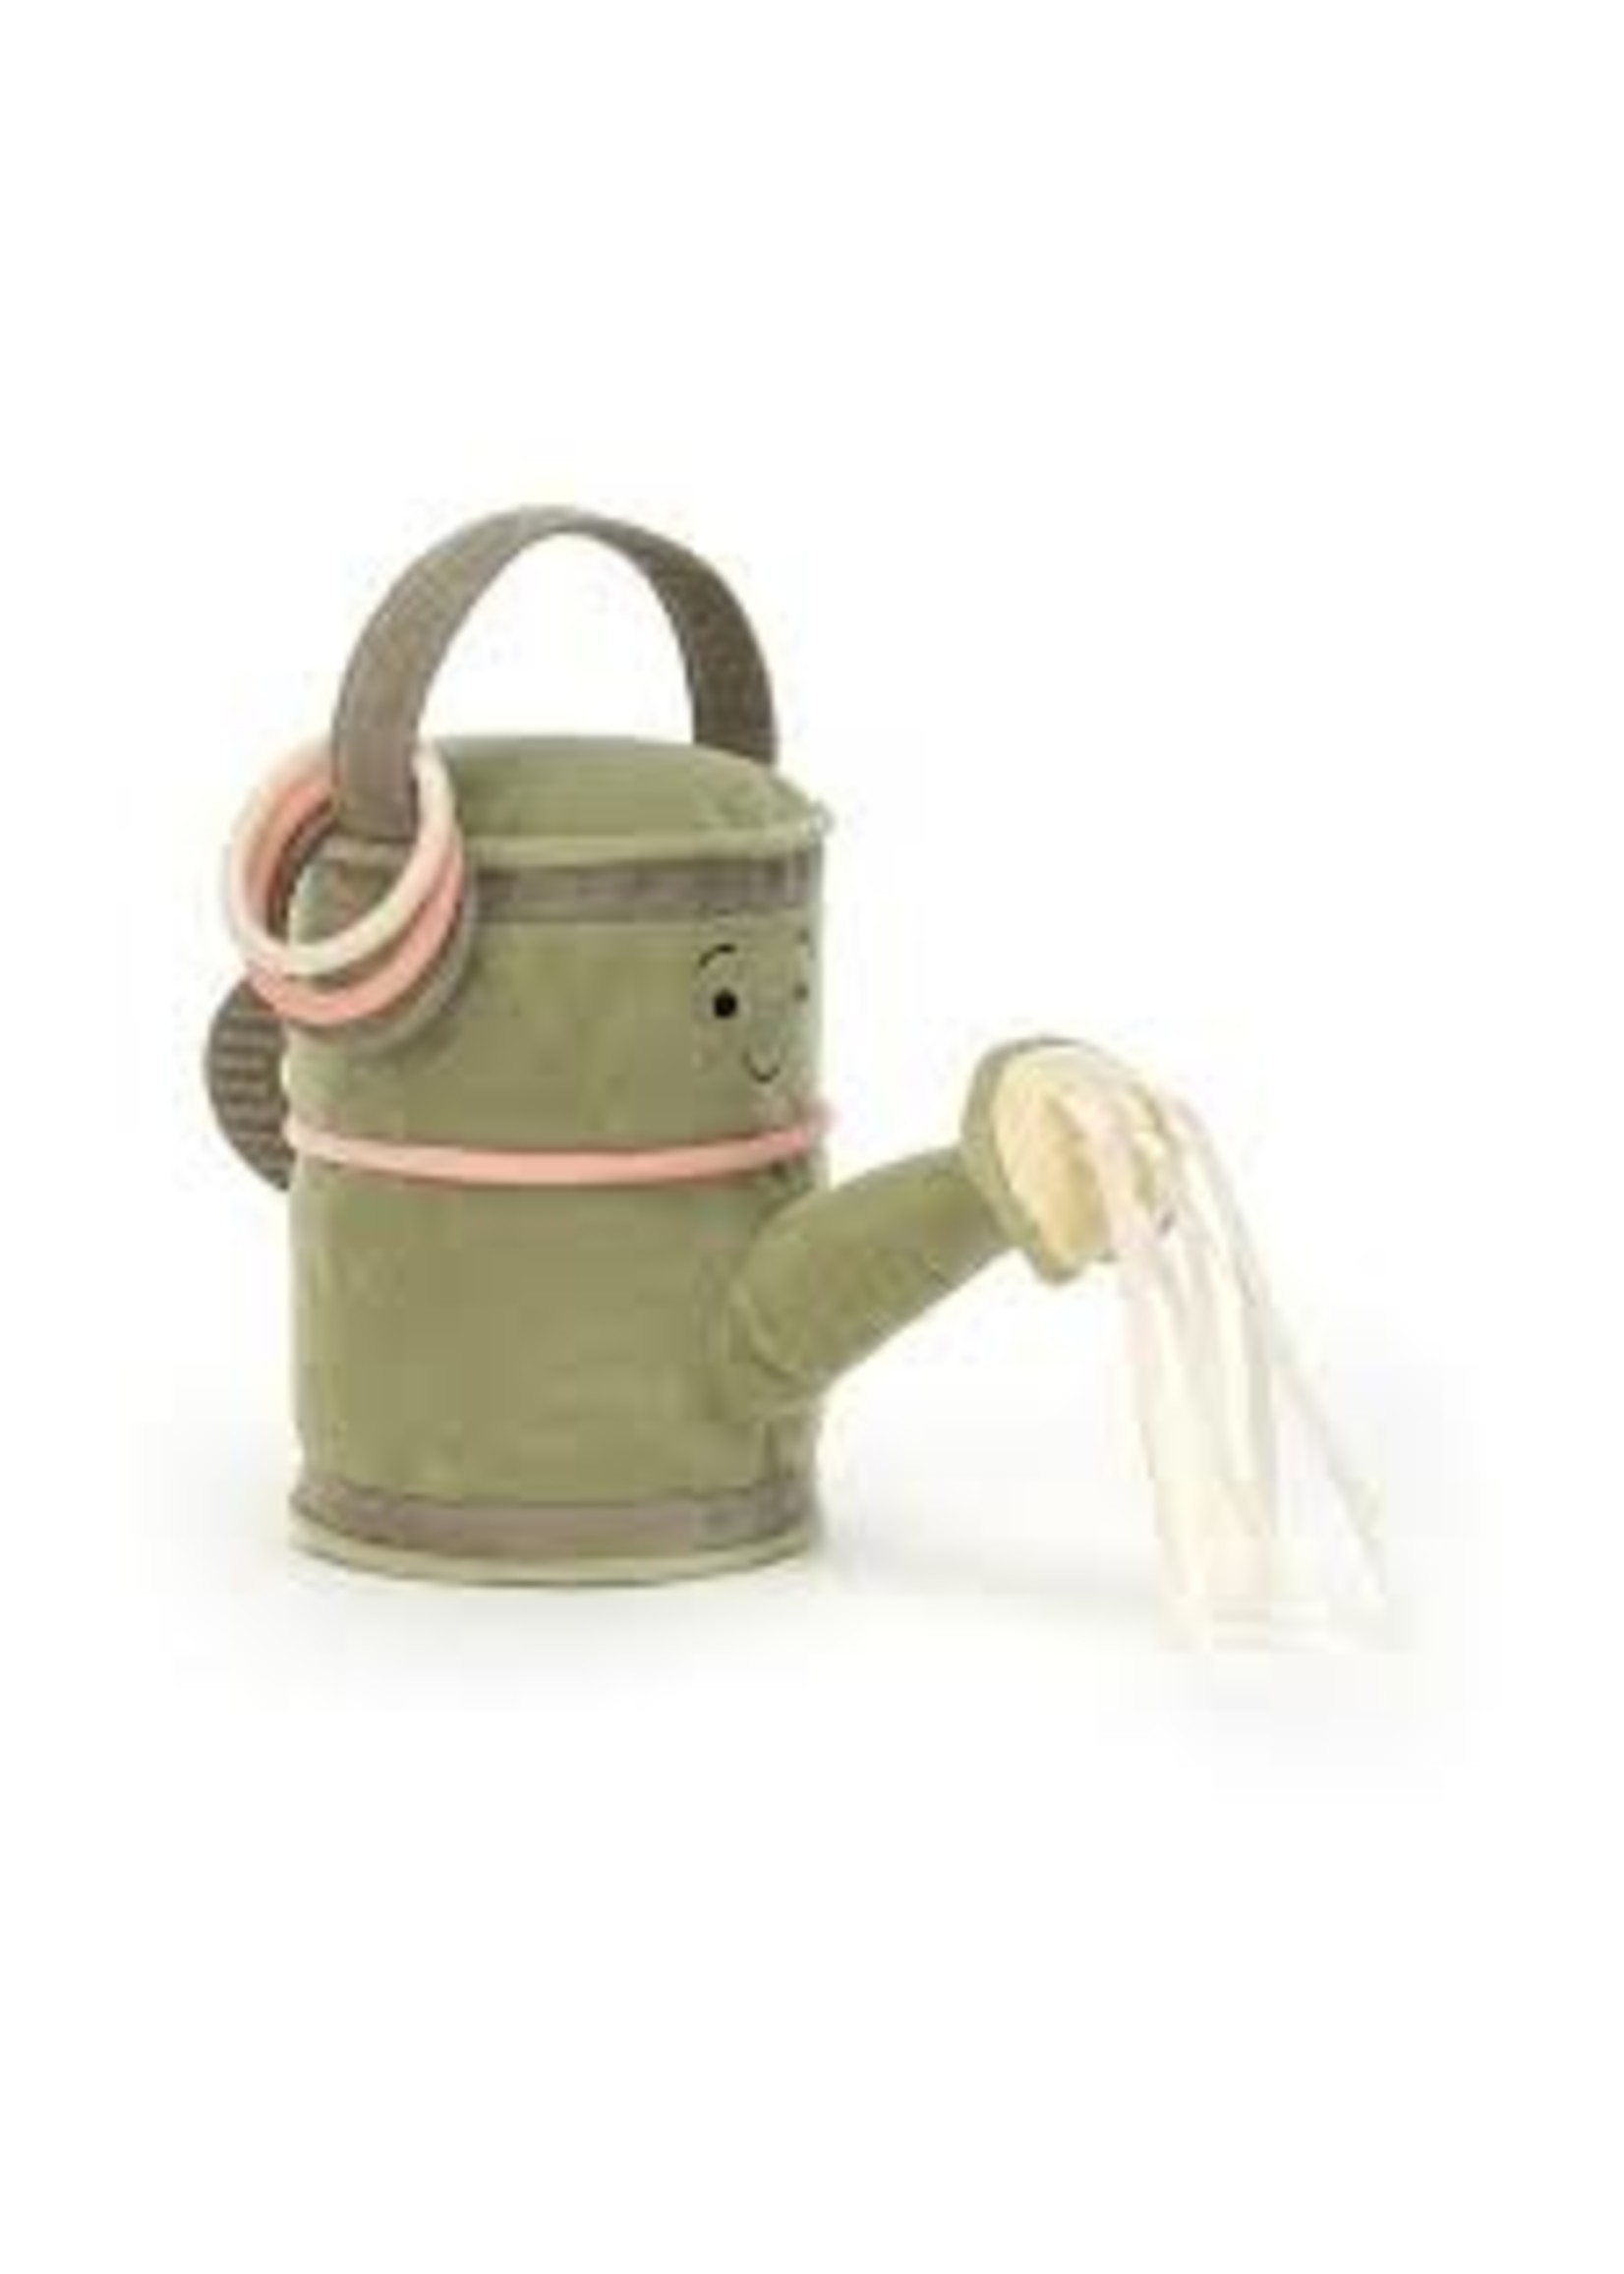 Jellycat I am Whimsy Garden Watering Can